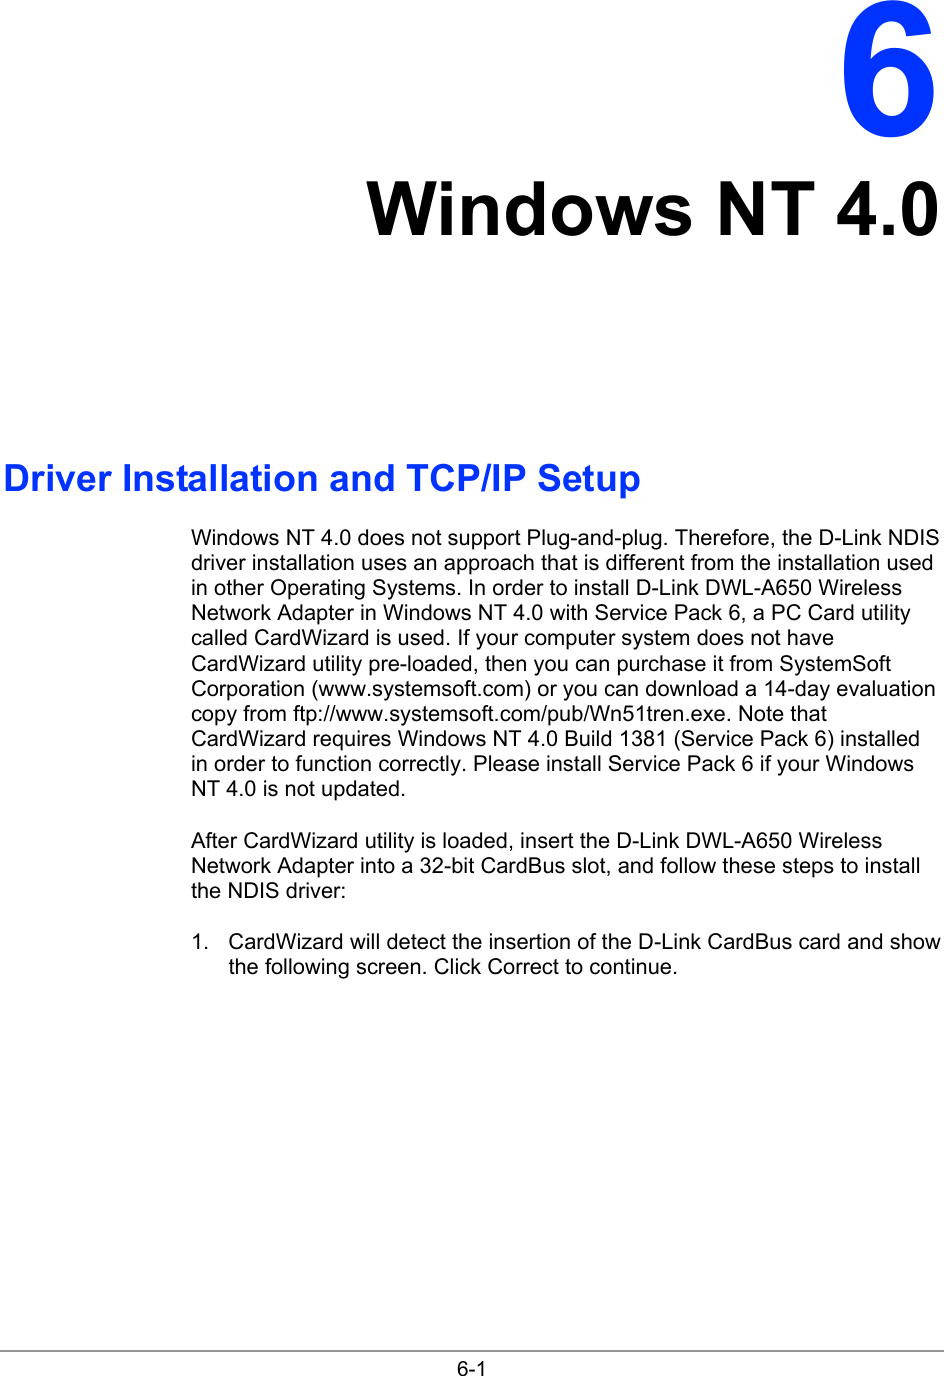  6-1 6 Windows NT 4.0 Driver Installation and TCP/IP Setup Windows NT 4.0 does not support Plug-and-plug. Therefore, the D-Link NDIS driver installation uses an approach that is different from the installation used in other Operating Systems. In order to install D-Link DWL-A650 Wireless Network Adapter in Windows NT 4.0 with Service Pack 6, a PC Card utility called CardWizard is used. If your computer system does not have CardWizard utility pre-loaded, then you can purchase it from SystemSoft Corporation (www.systemsoft.com) or you can download a 14-day evaluation copy from ftp://www.systemsoft.com/pub/Wn51tren.exe. Note that CardWizard requires Windows NT 4.0 Build 1381 (Service Pack 6) installed in order to function correctly. Please install Service Pack 6 if your Windows NT 4.0 is not updated. After CardWizard utility is loaded, insert the D-Link DWL-A650 Wireless Network Adapter into a 32-bit CardBus slot, and follow these steps to install the NDIS driver: 1.  CardWizard will detect the insertion of the D-Link CardBus card and show the following screen. Click Correct to continue. 